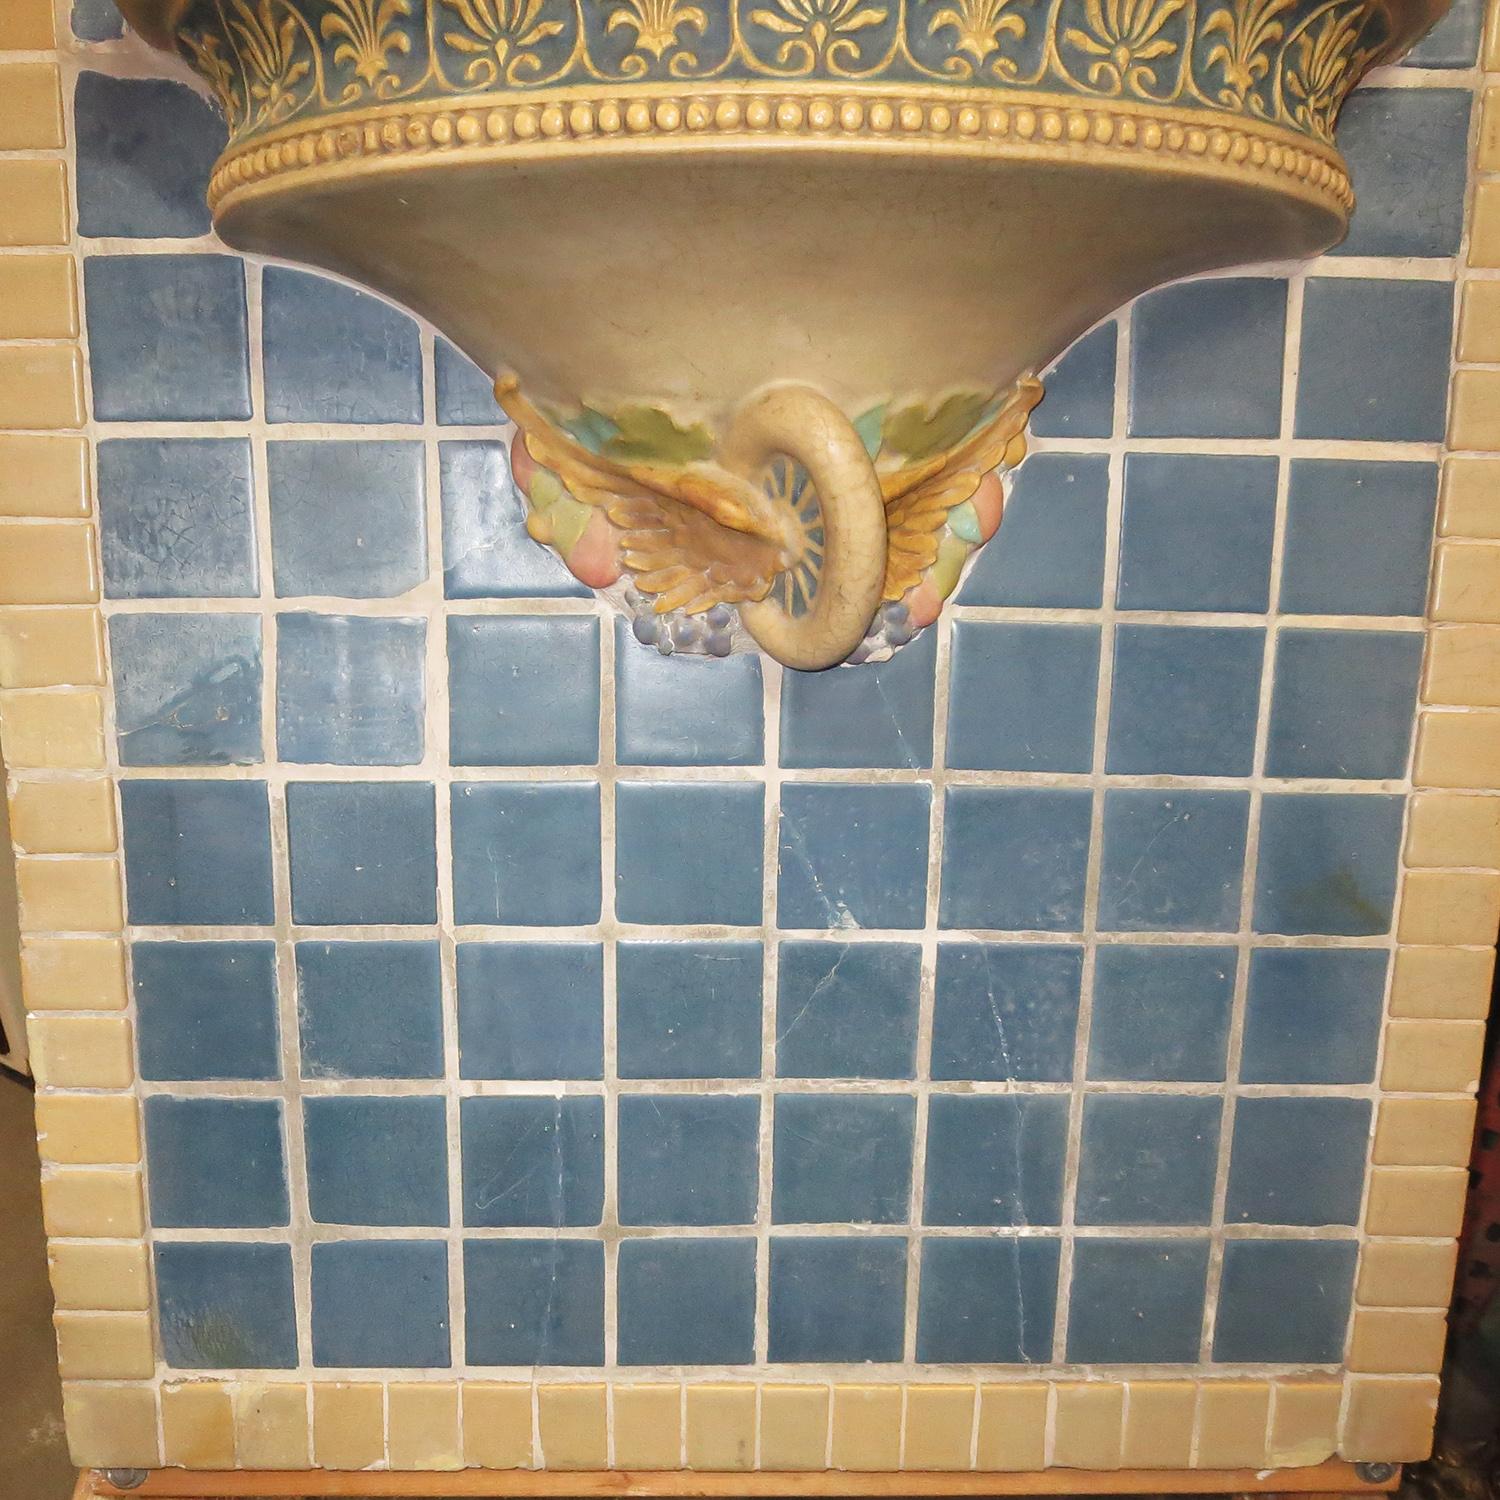 American Indianapolis Motor Speedway Tile Fountain by Rookwood Pottery, 1909 For Sale